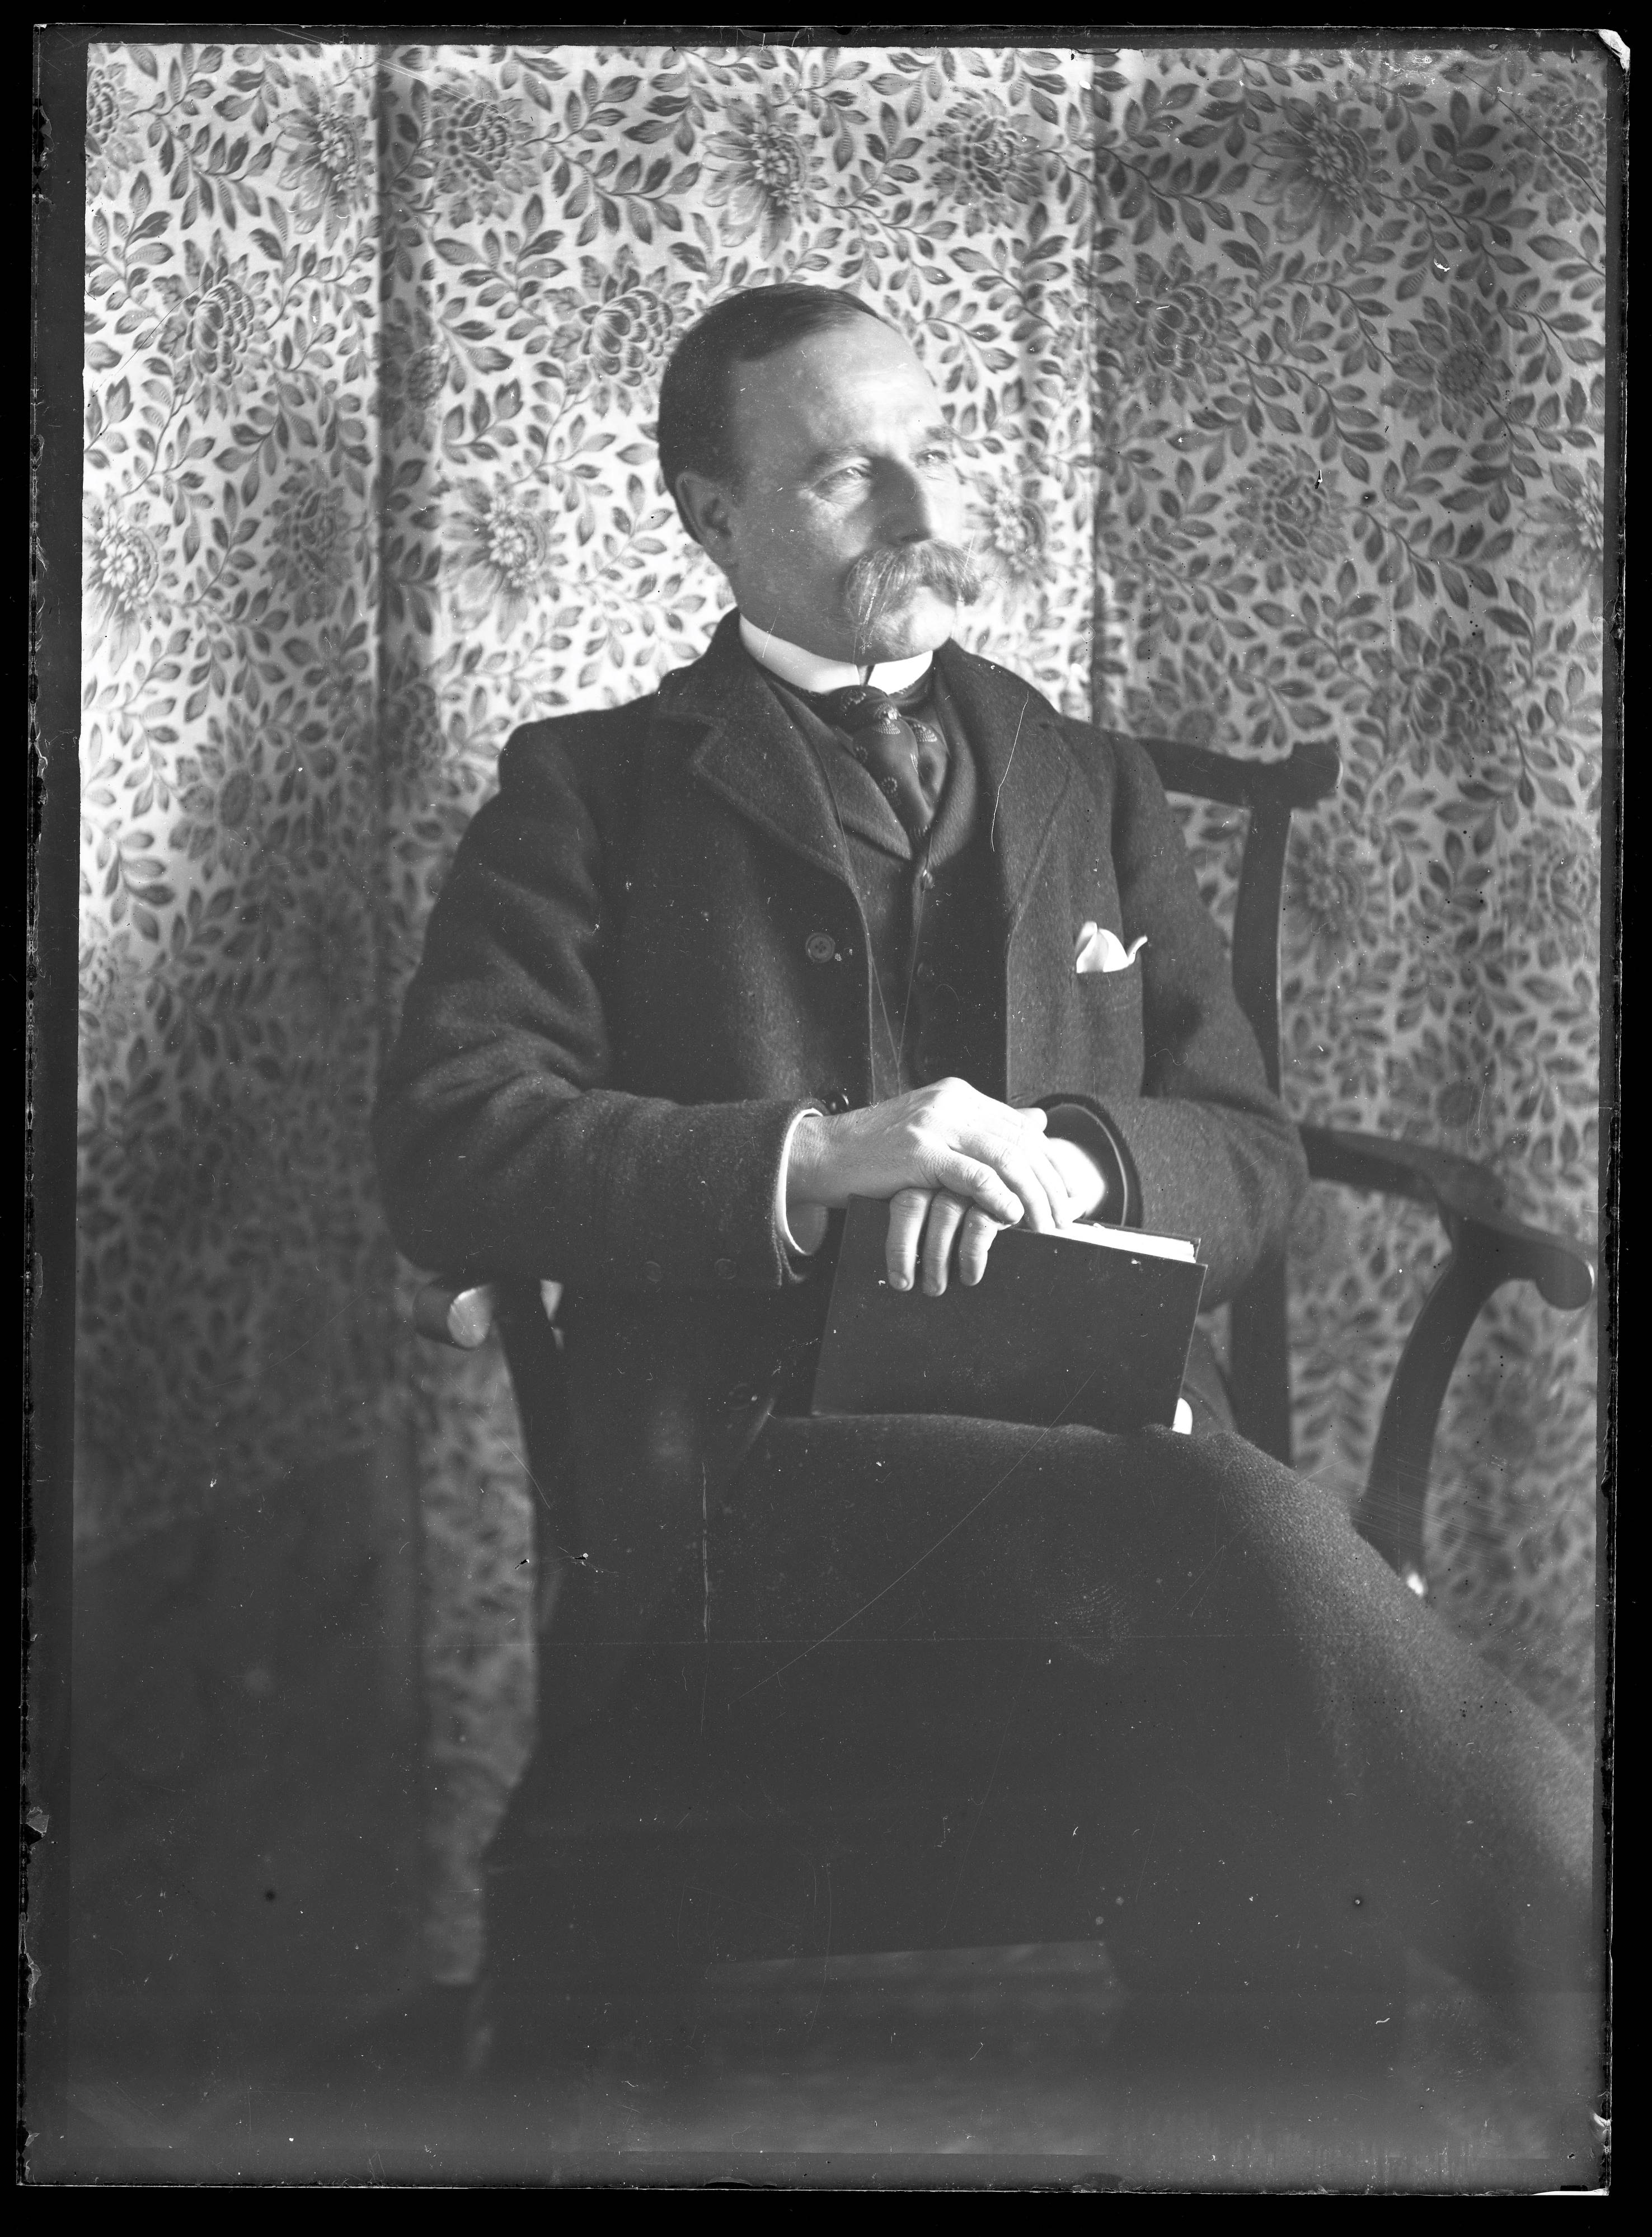 A man holding a book, as he poses for his photographic portrait. It was common practise to pose with items such as books for formal portraits. From a collection found at the former photographer’s shop, Cheapside, Knaresborough. The photo dates from the Edwardian era.